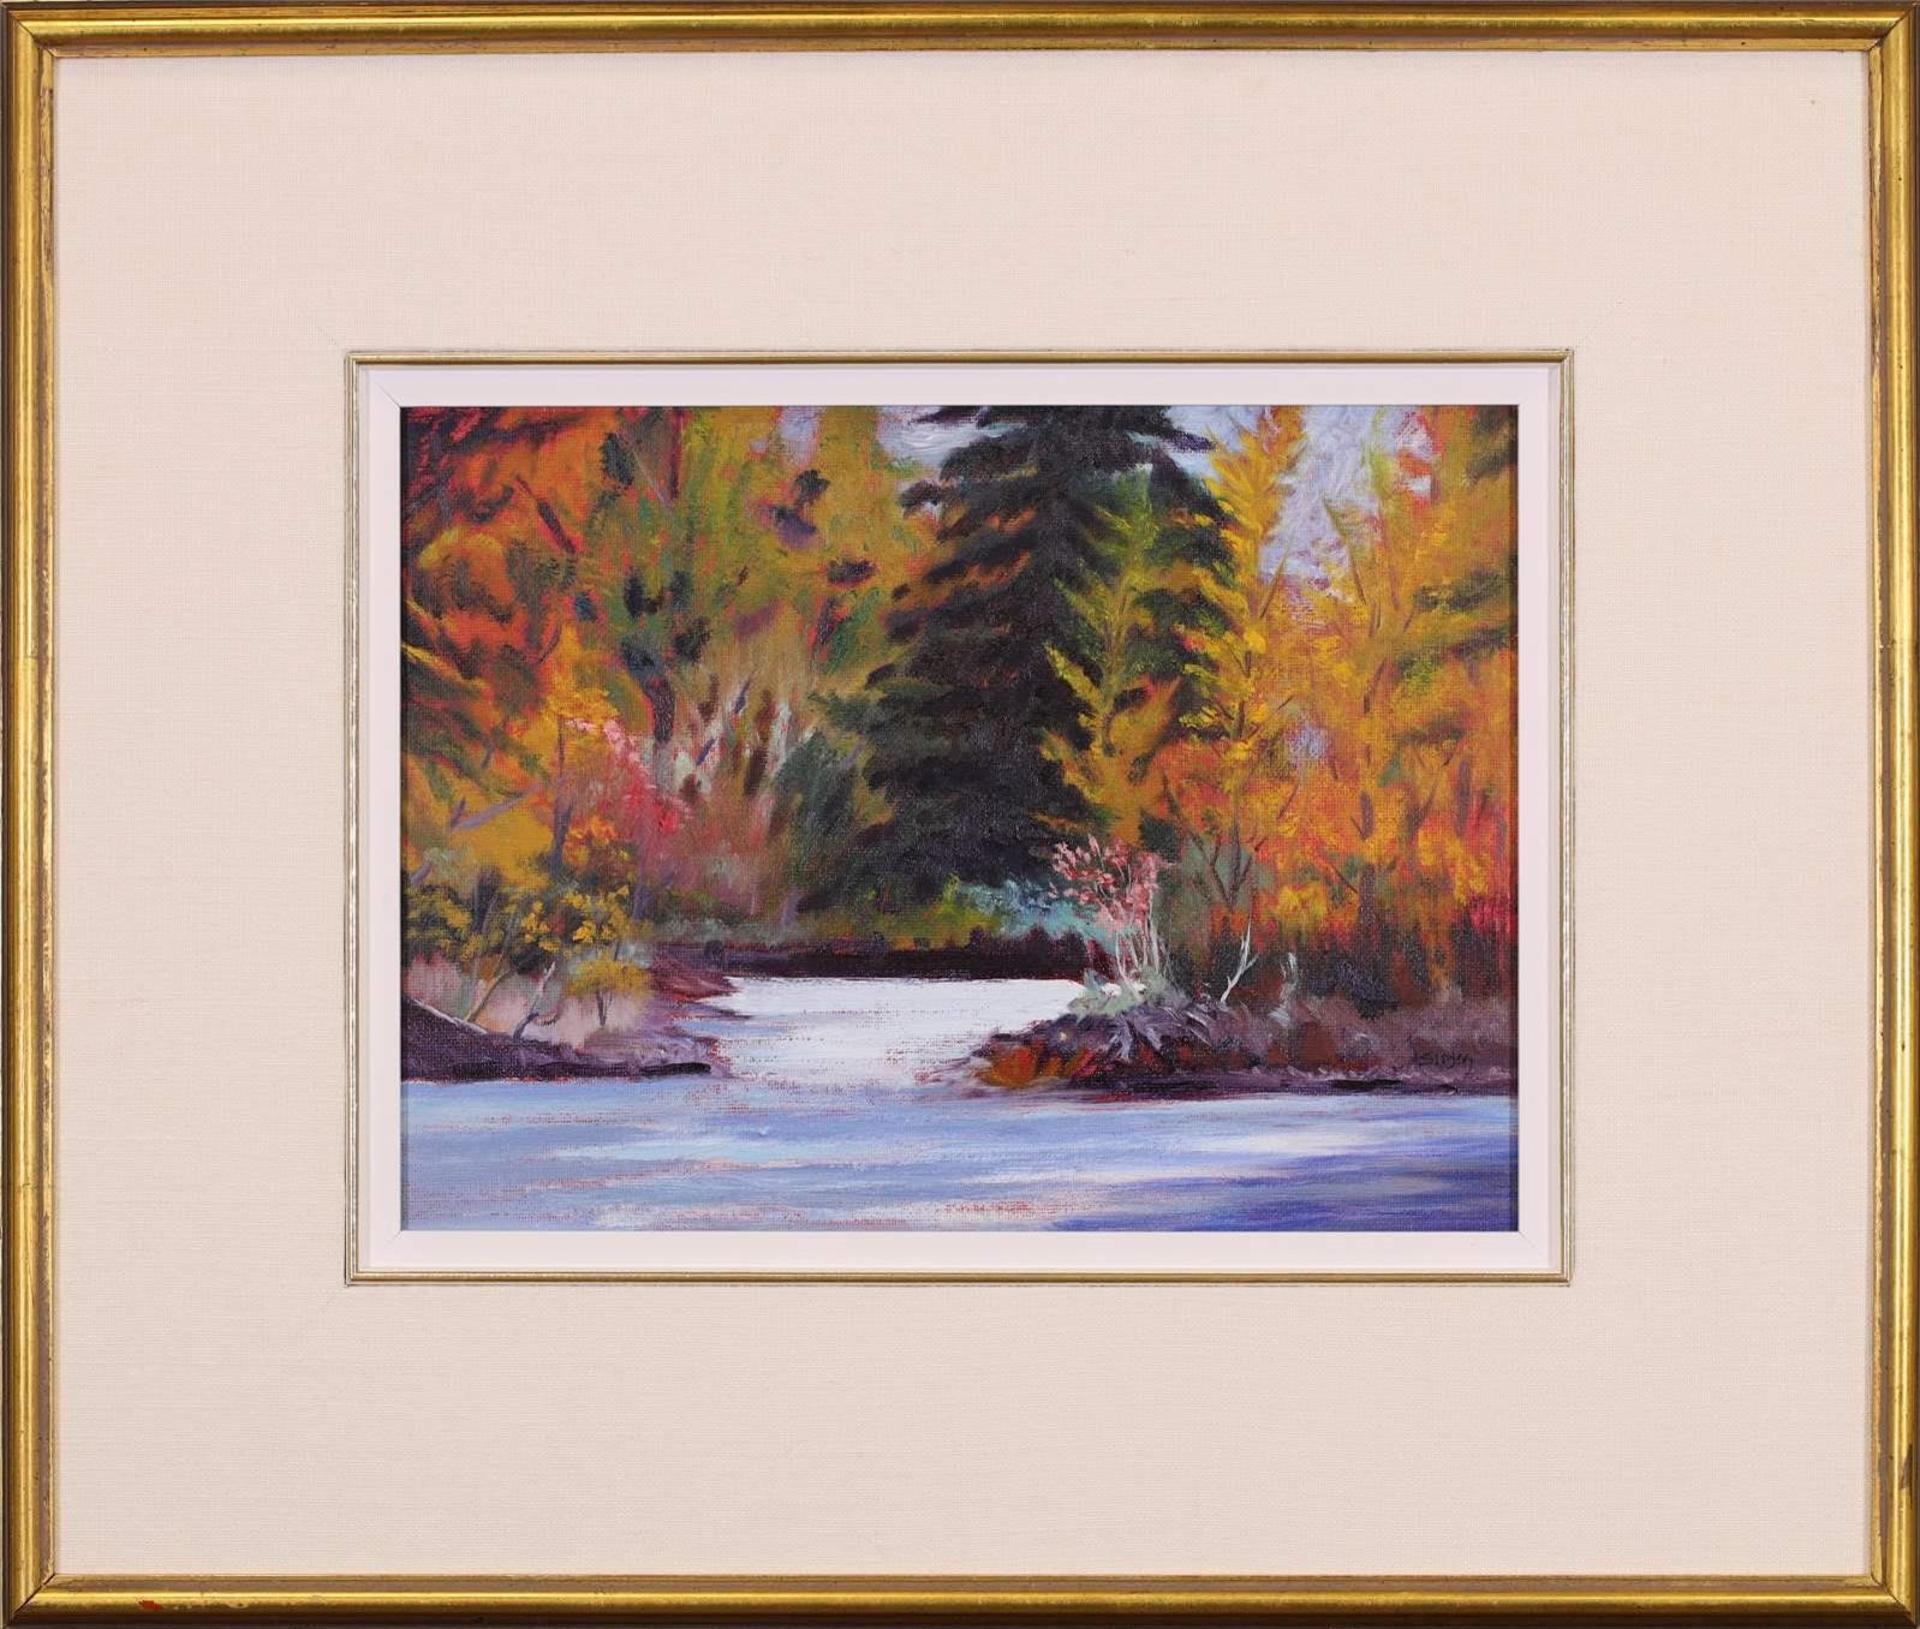 Yvette Simm (1937) - “Fall in Bowness Park”